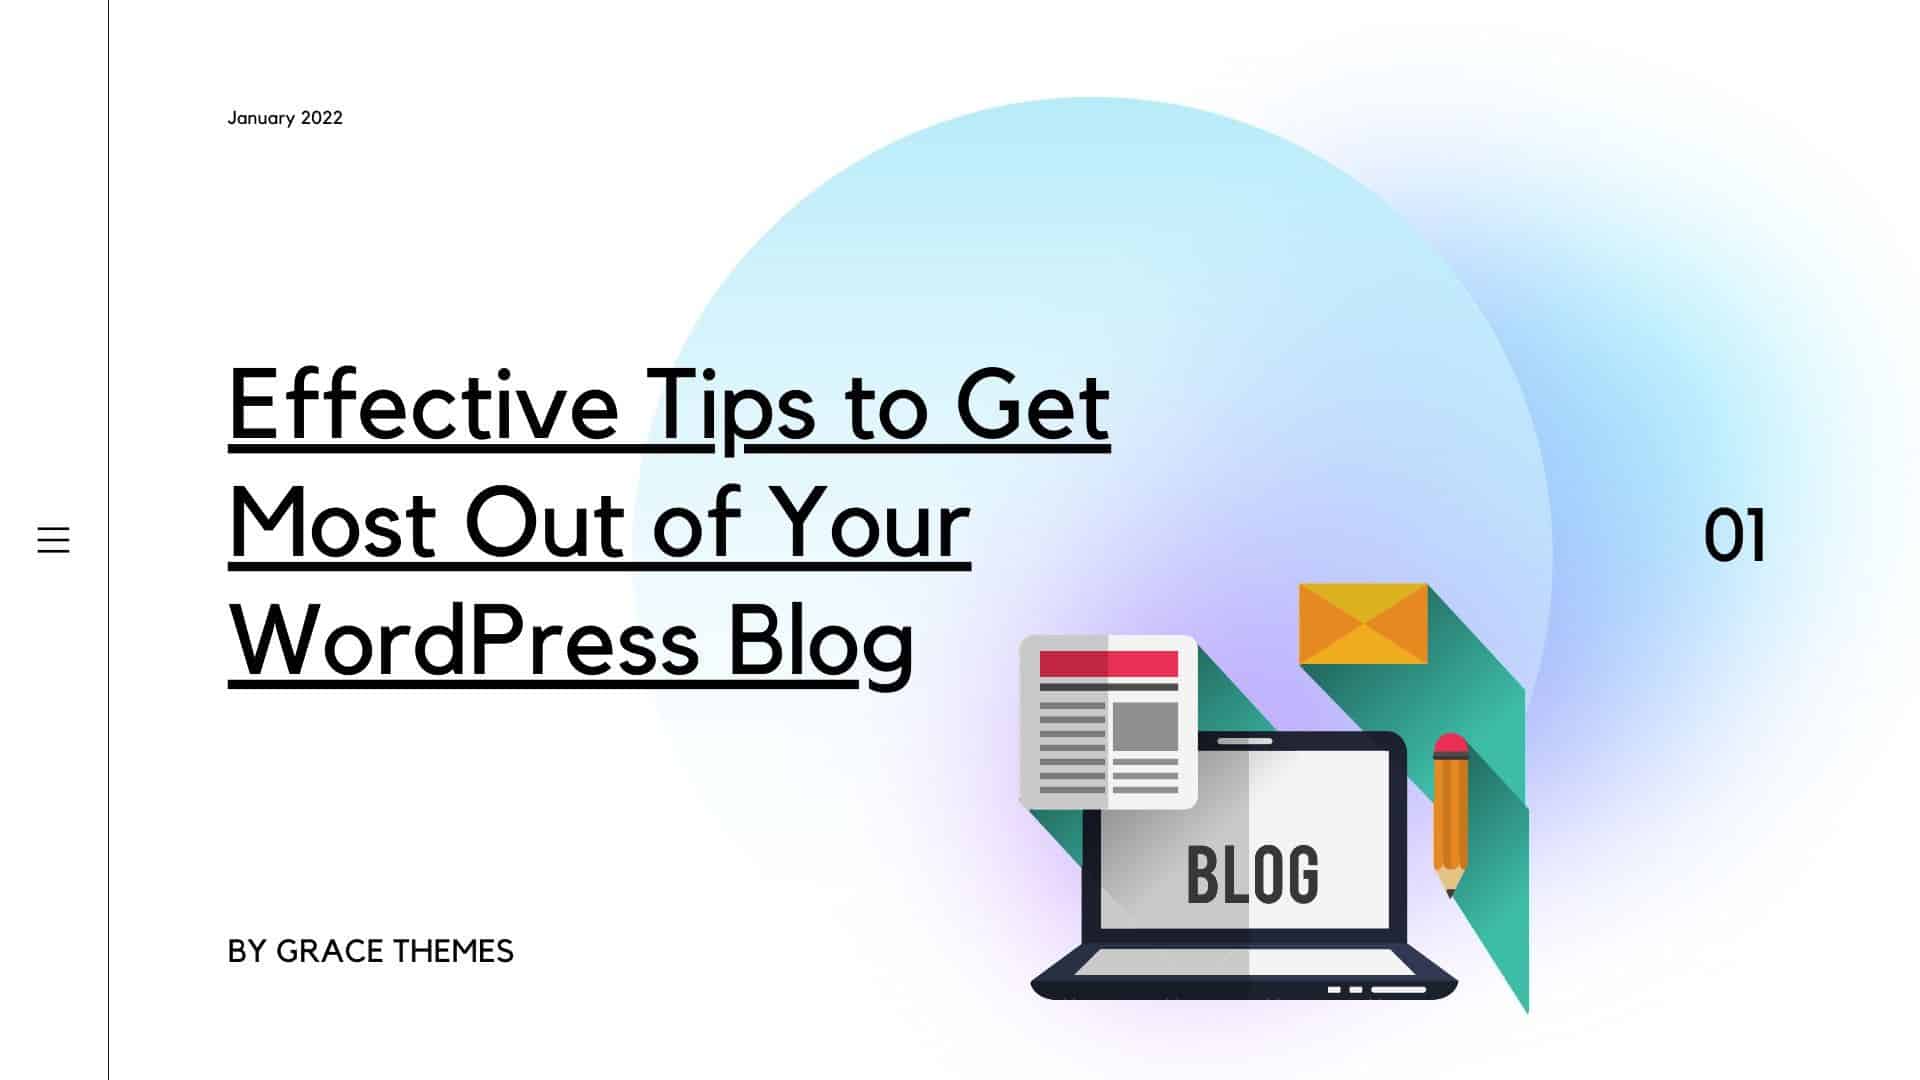 Effective Tips to Get the Most Out of Your WordPress Blog